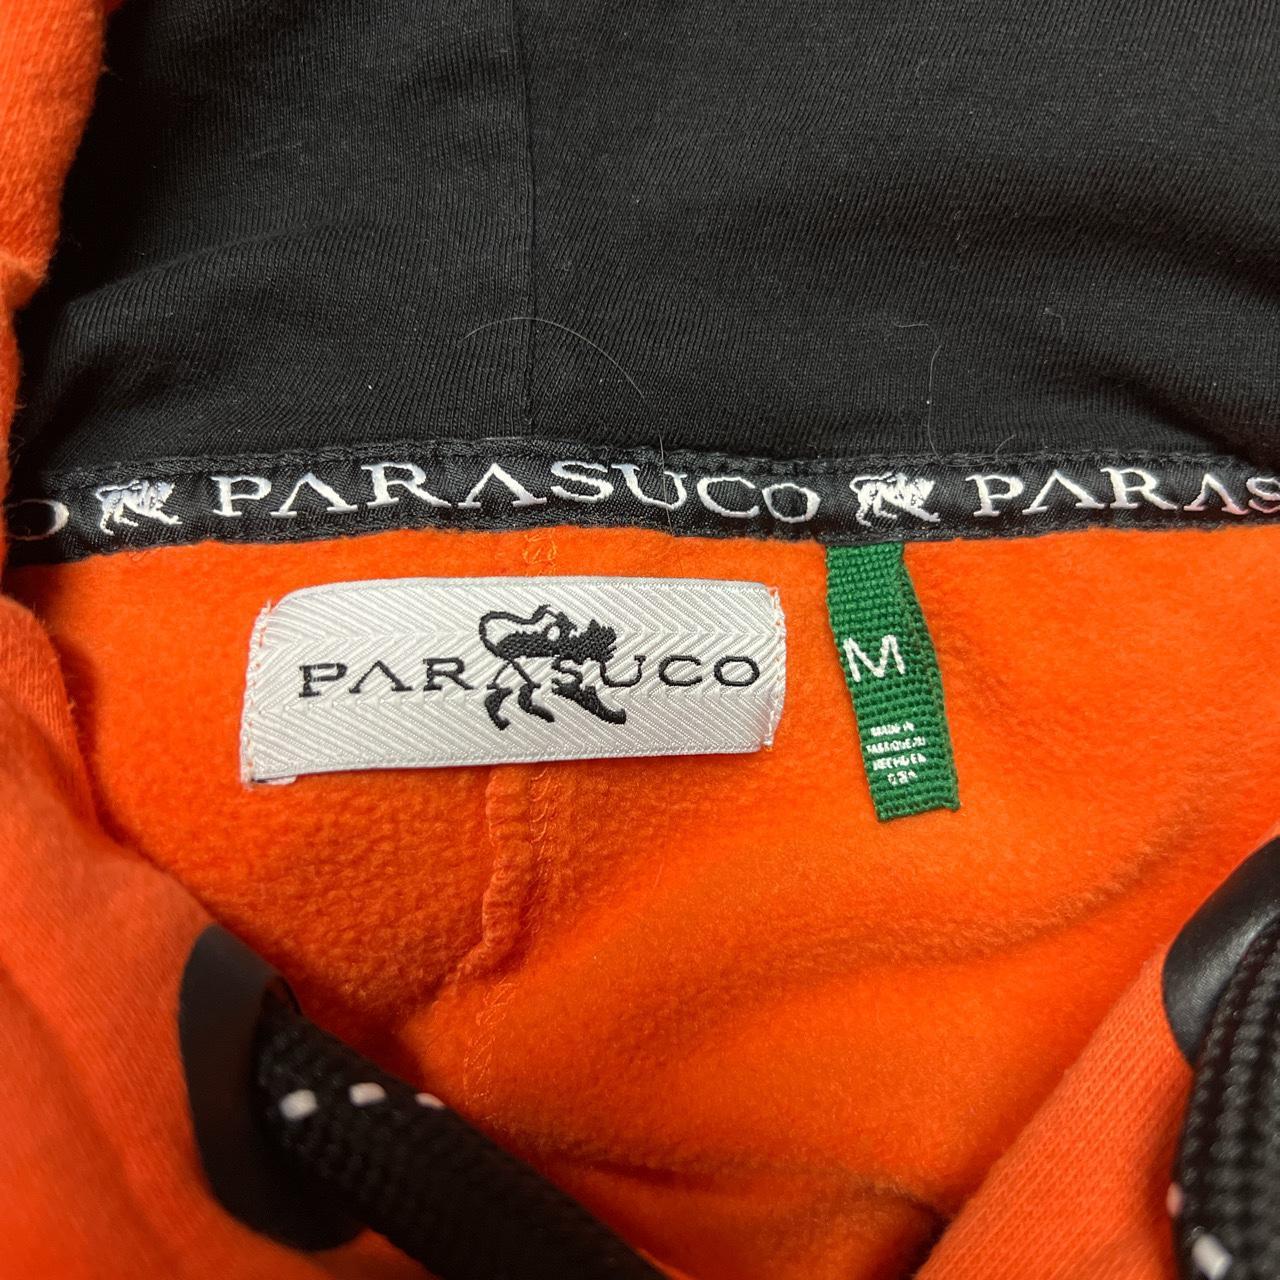 Product Image 4 - PARASUCO Orange cropped hoddie🧡
Excellent preowned